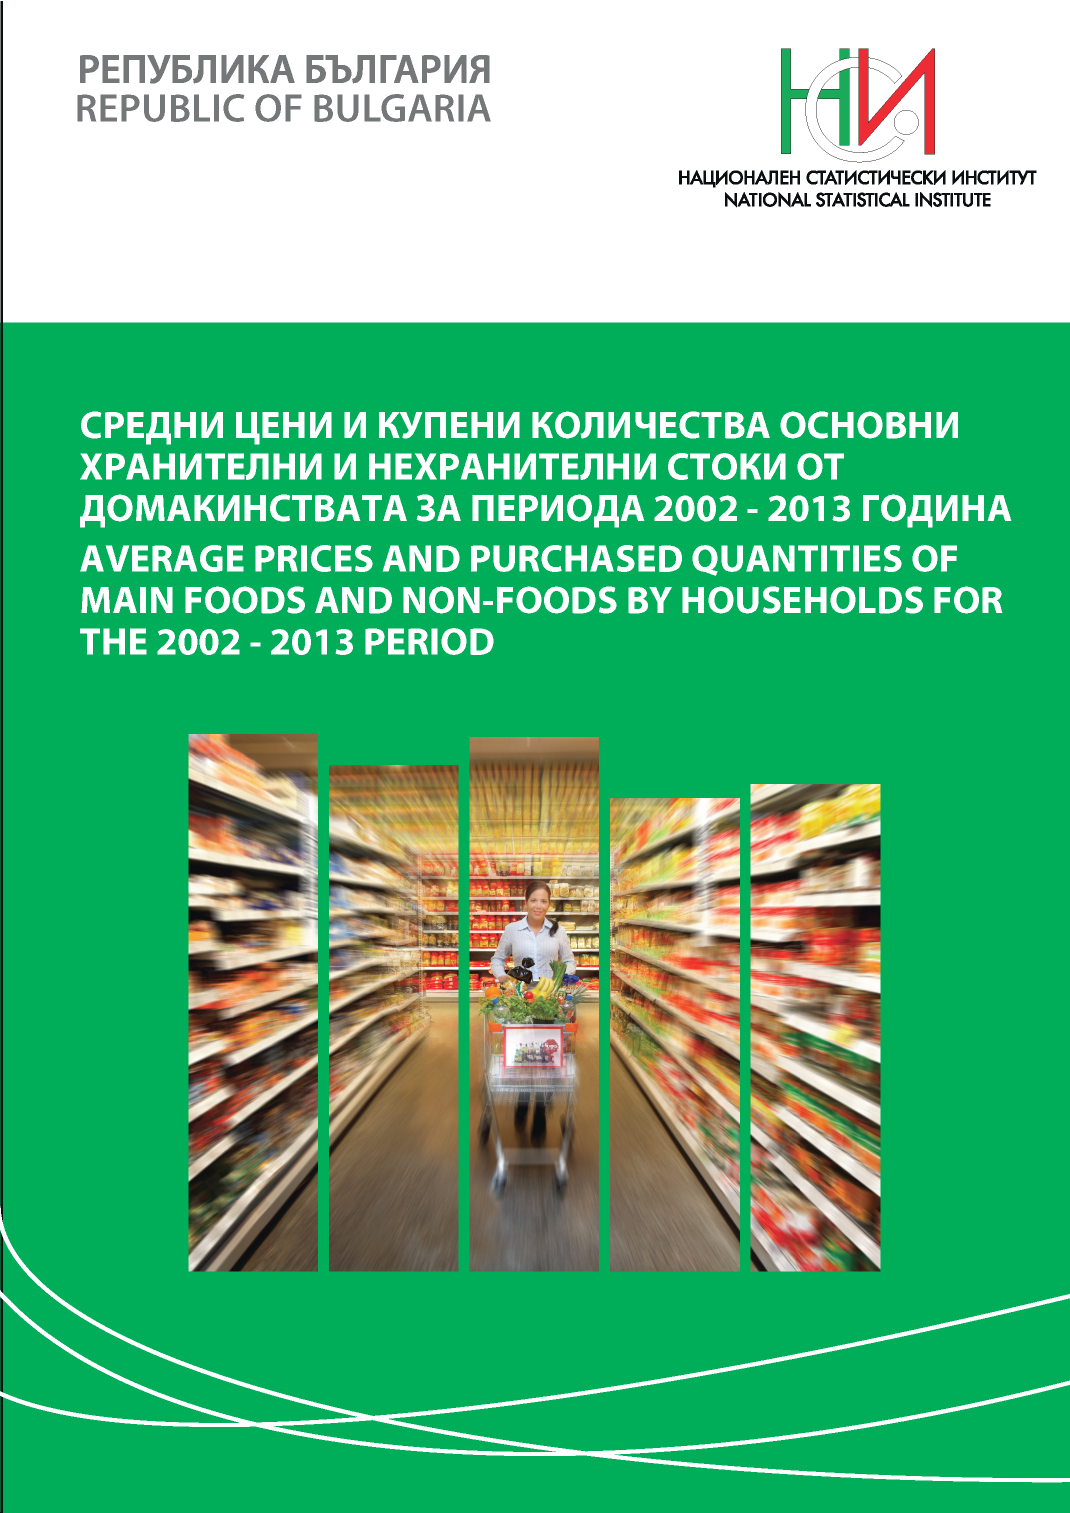 Average Prices and Purchased Quantities of Main Foods and Non-Foods by Households for the 2002 - 2013 period